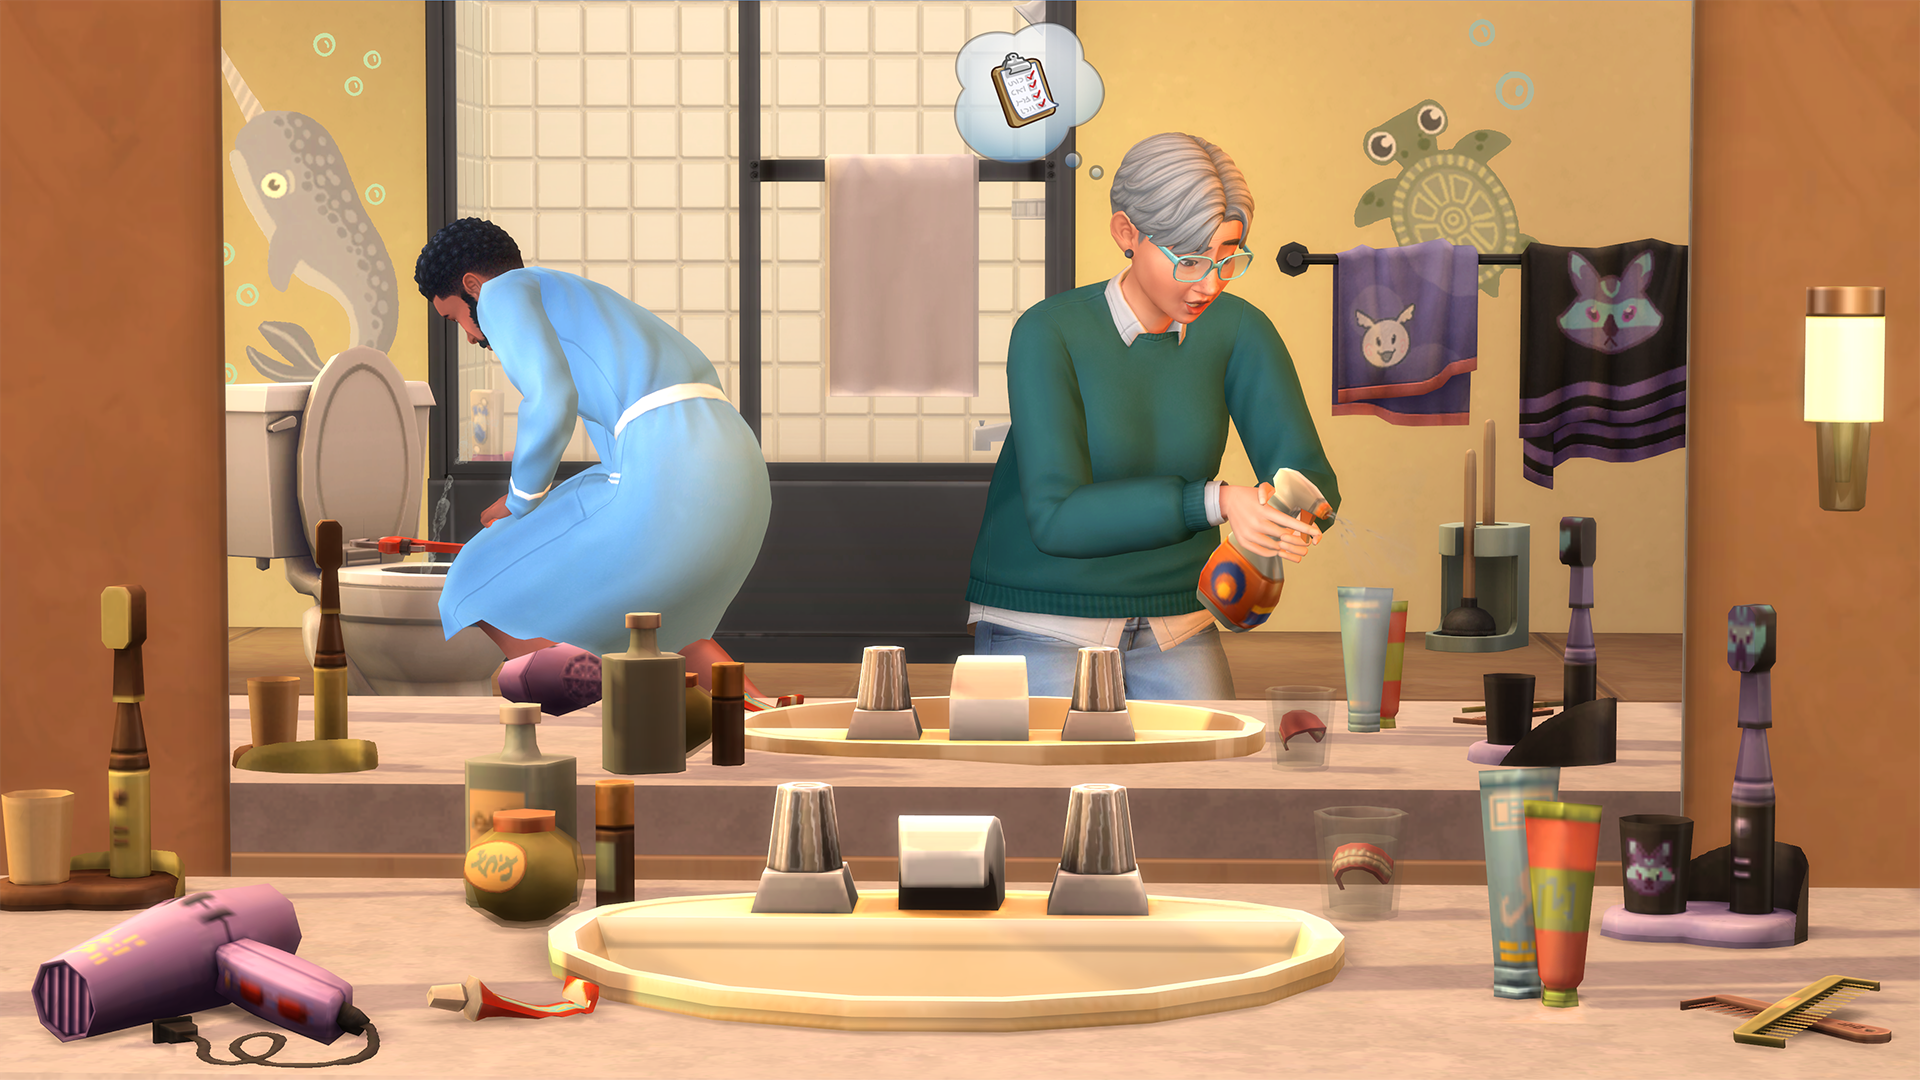 Image for The Sims 4 does messy bathrooms and sexy pants in next two DLC Kit packs